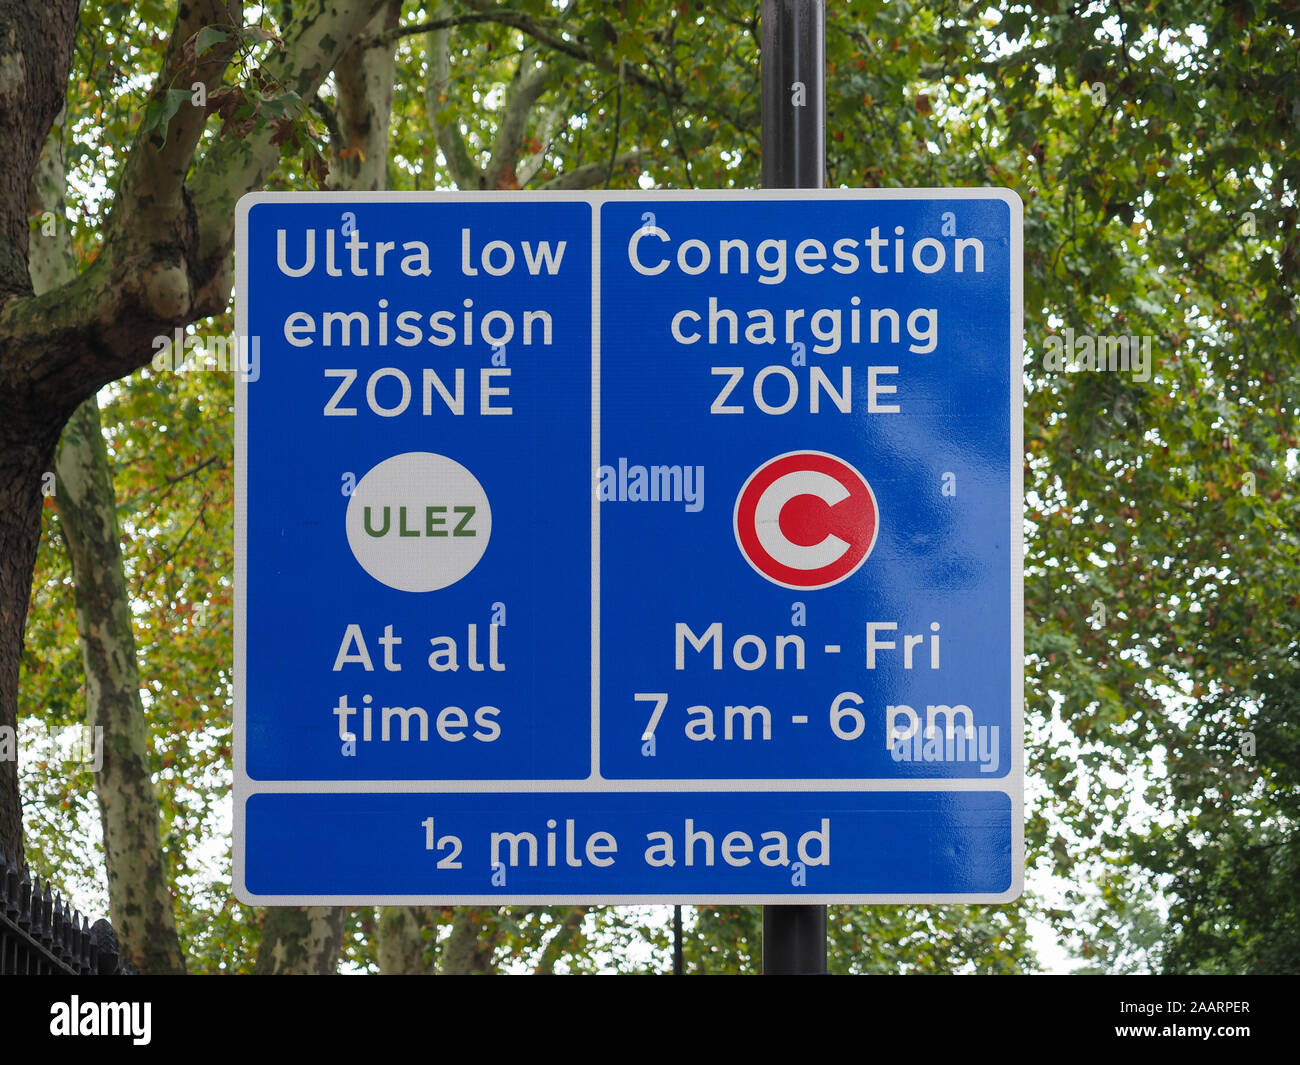 ULEZ (Ultra low emission zone at all times) and C (Congestion charging zone) signs in London, UK Stock Photo